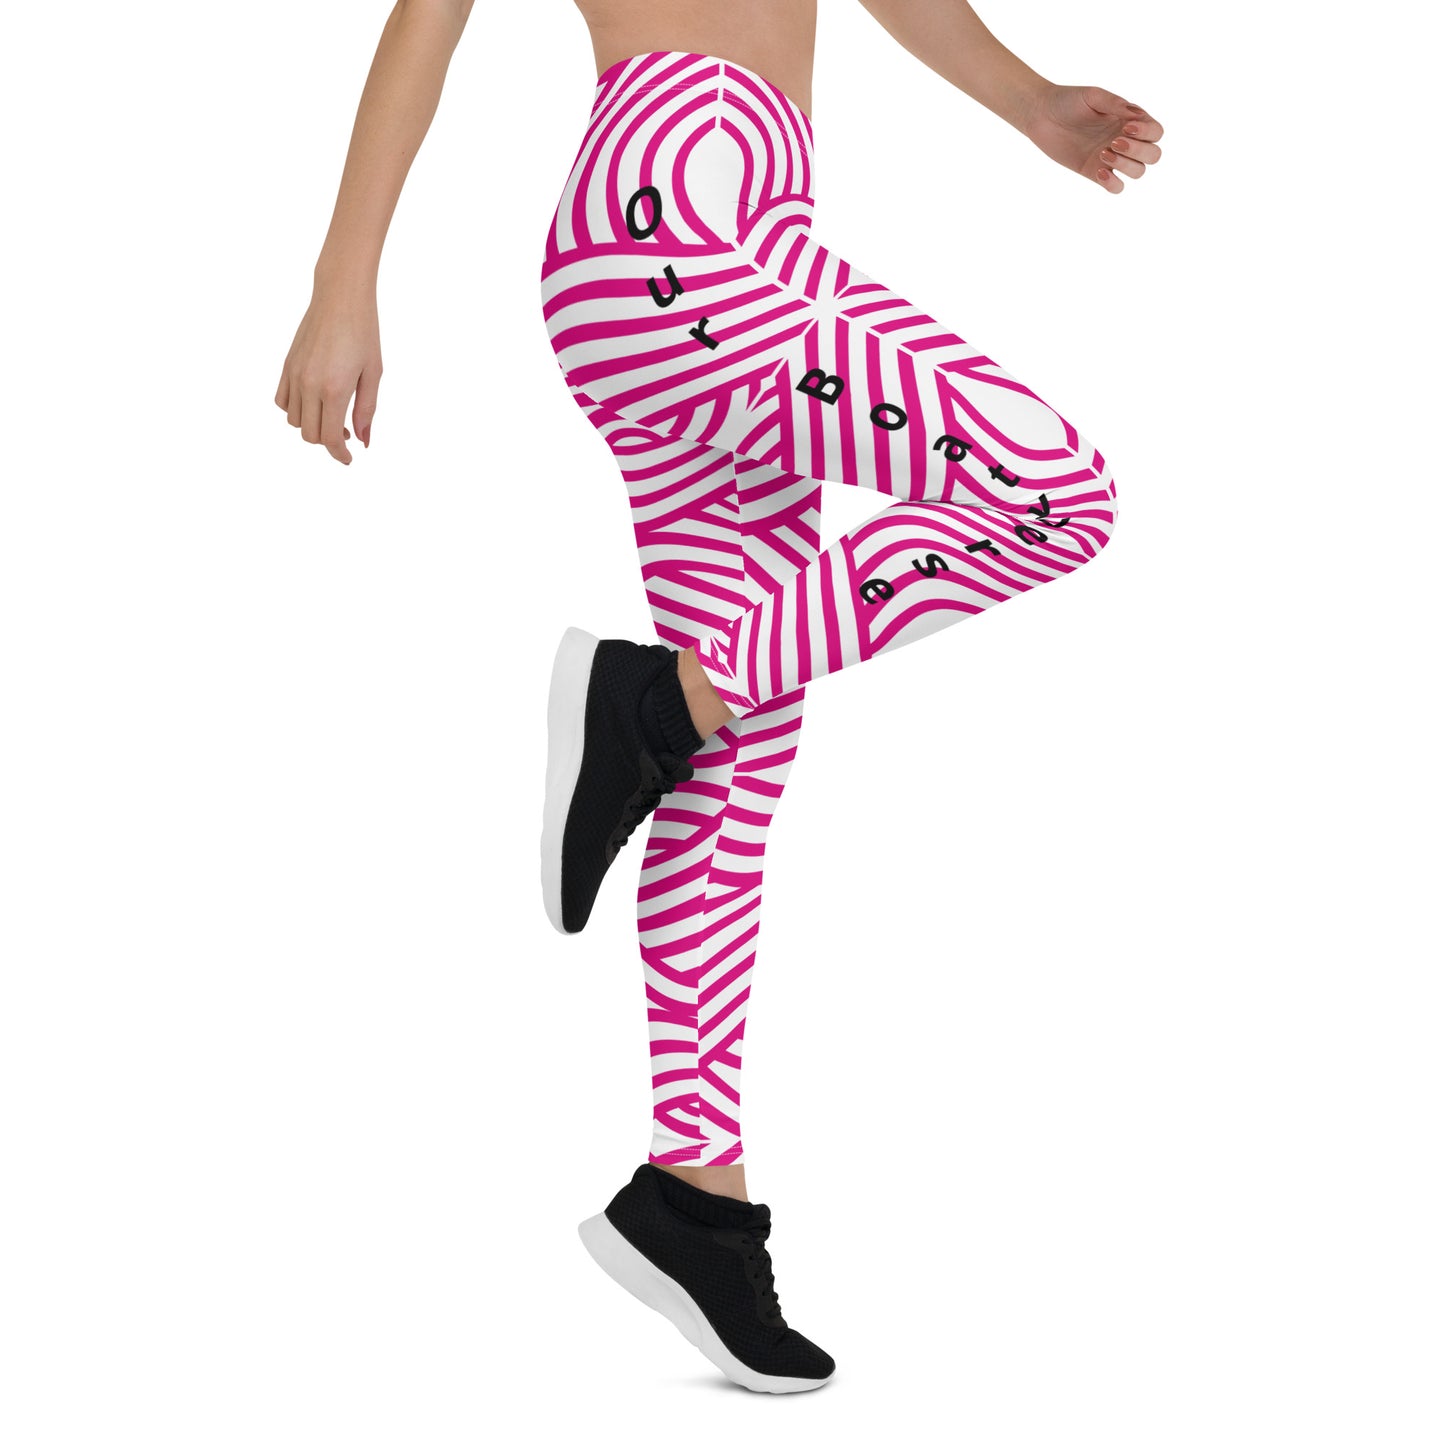 Funky Bright PINK Gym Leggings by Our BoatyVerse